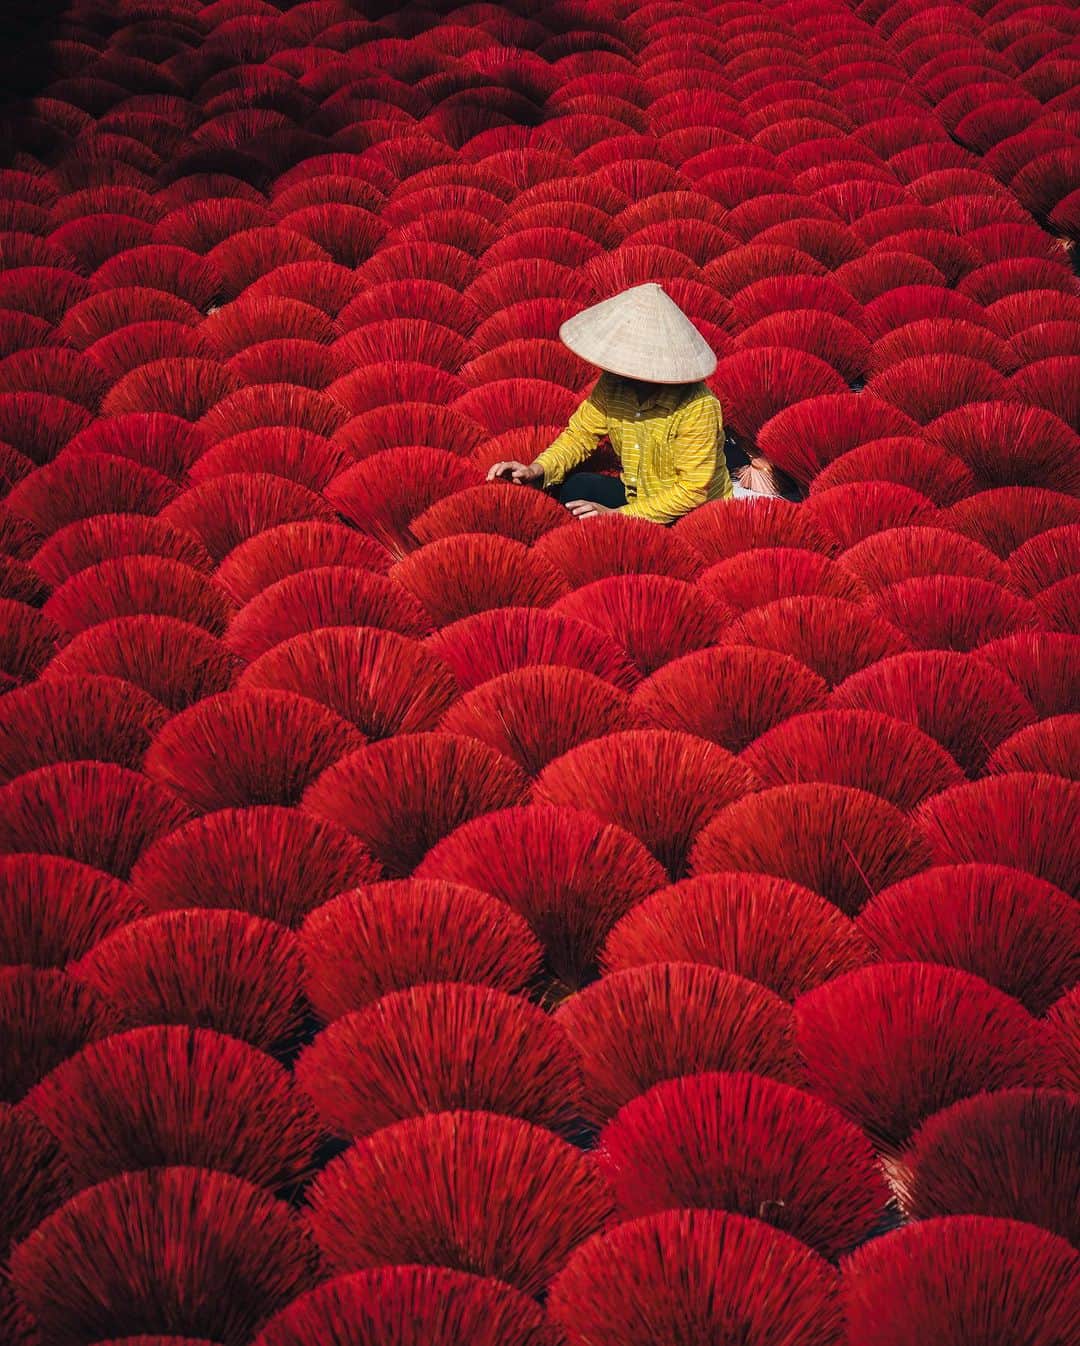 R̸K̸のインスタグラム：「Red Carpet in Vietnam.  ・ ・ ・ ・ #beautifuldestinations #earthfocus #earthbestshots #earthoffcial #earthpix #thegreatplanet #discoverearth #roamtheplanet #ourplanetdaily #nature #tentree #designboom #voyaged #sonyalpha #bealpha #travellingthroughtheworld #streets_vision #lonelyplanet #luxuryworldtraveler #onlyforluxury #bbctravel #lovetheworld @sonyalpha  @lightroom @soul.planet @earthfever @9gag @paradise @natgeotravel @awesome.earth @national_archaeology」